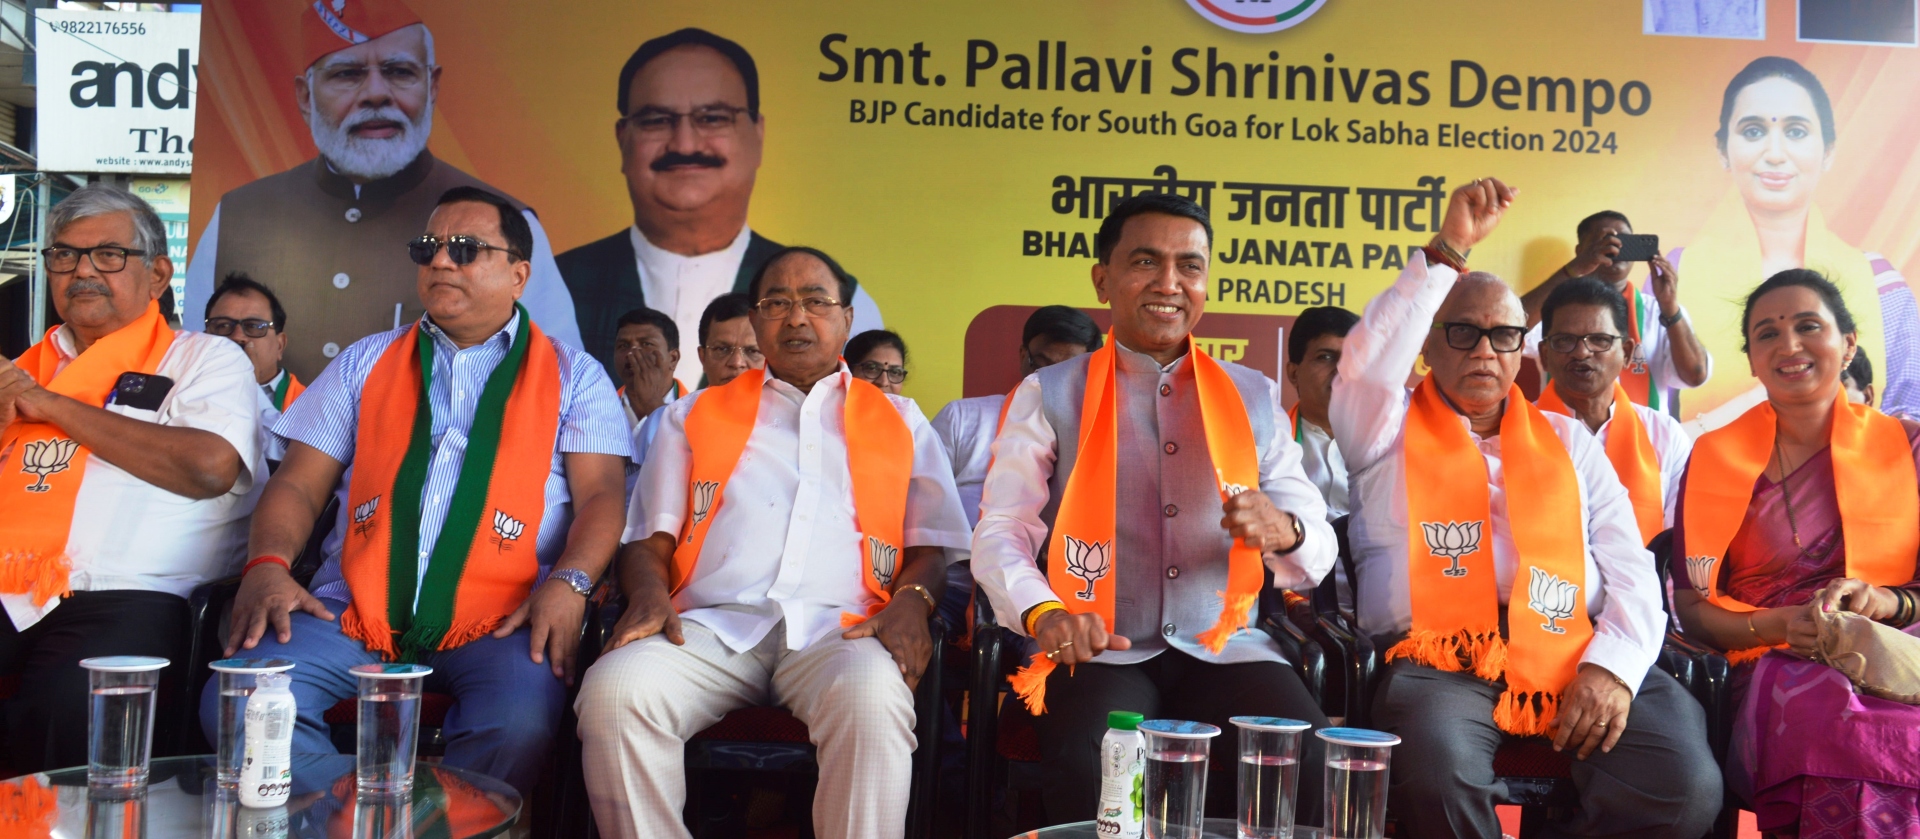 With half of Cabinet from South and turncoats in ranks, BJP's confidence is now sky high